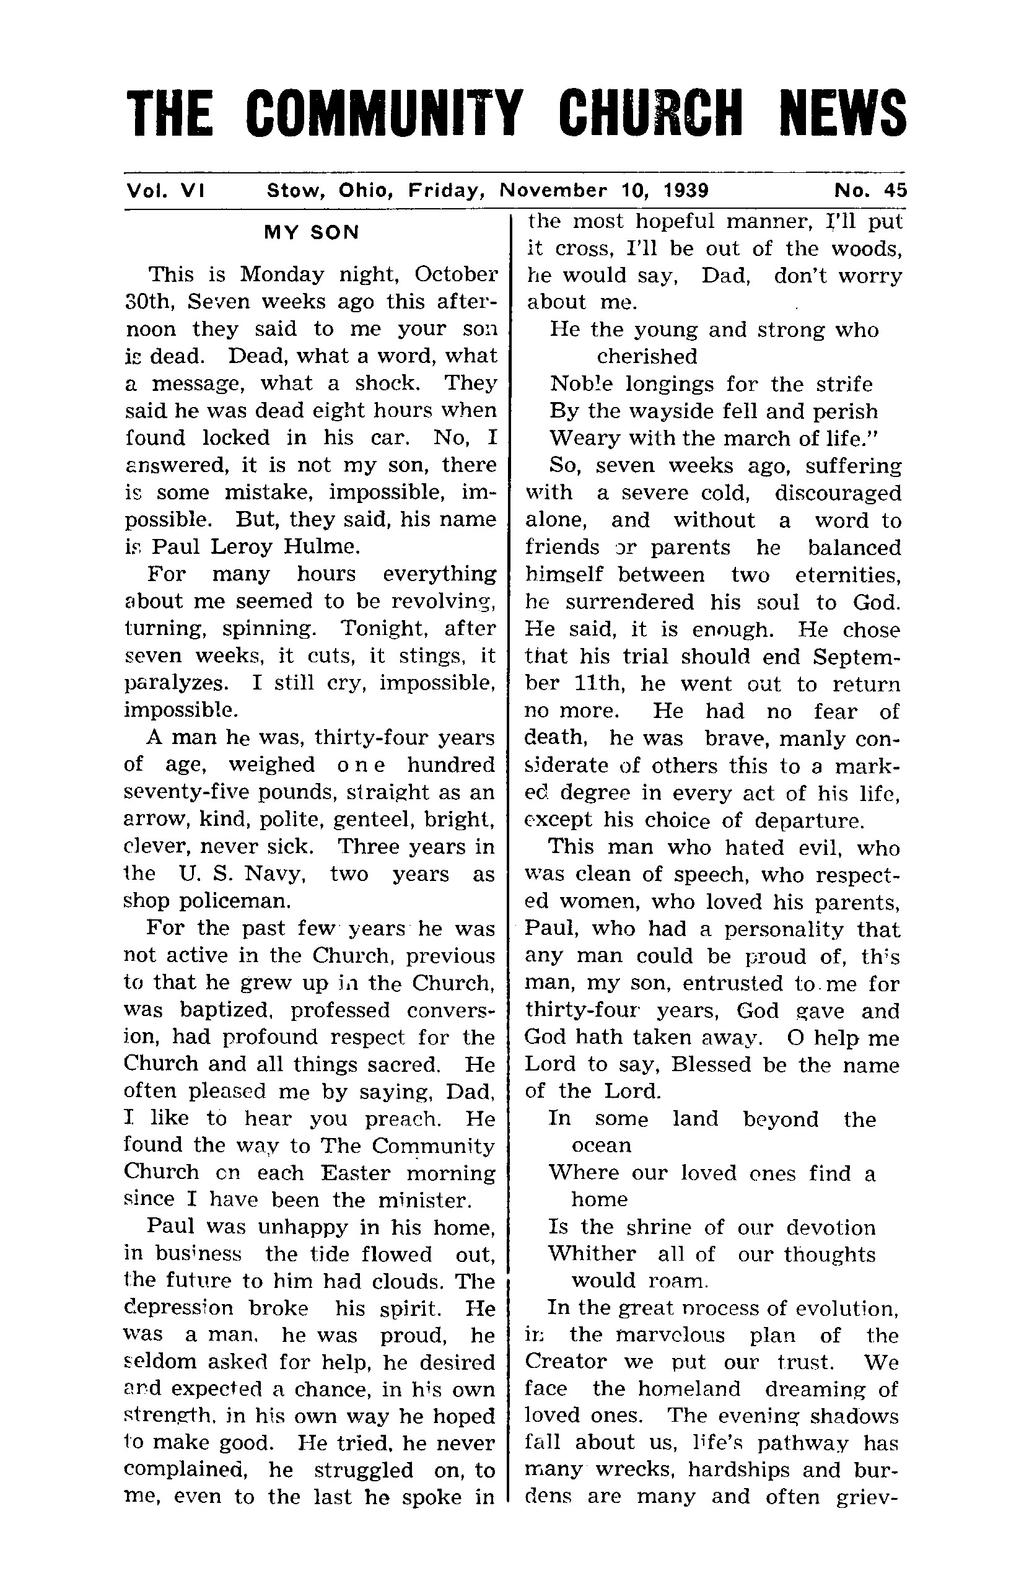 THE COMMUNITY CHURCH NEWS Vol. VI Stow, Ohio, Friday, November 10, 1939 MY SON For many hours everything about me seemed to be revolving, turning, spinning.